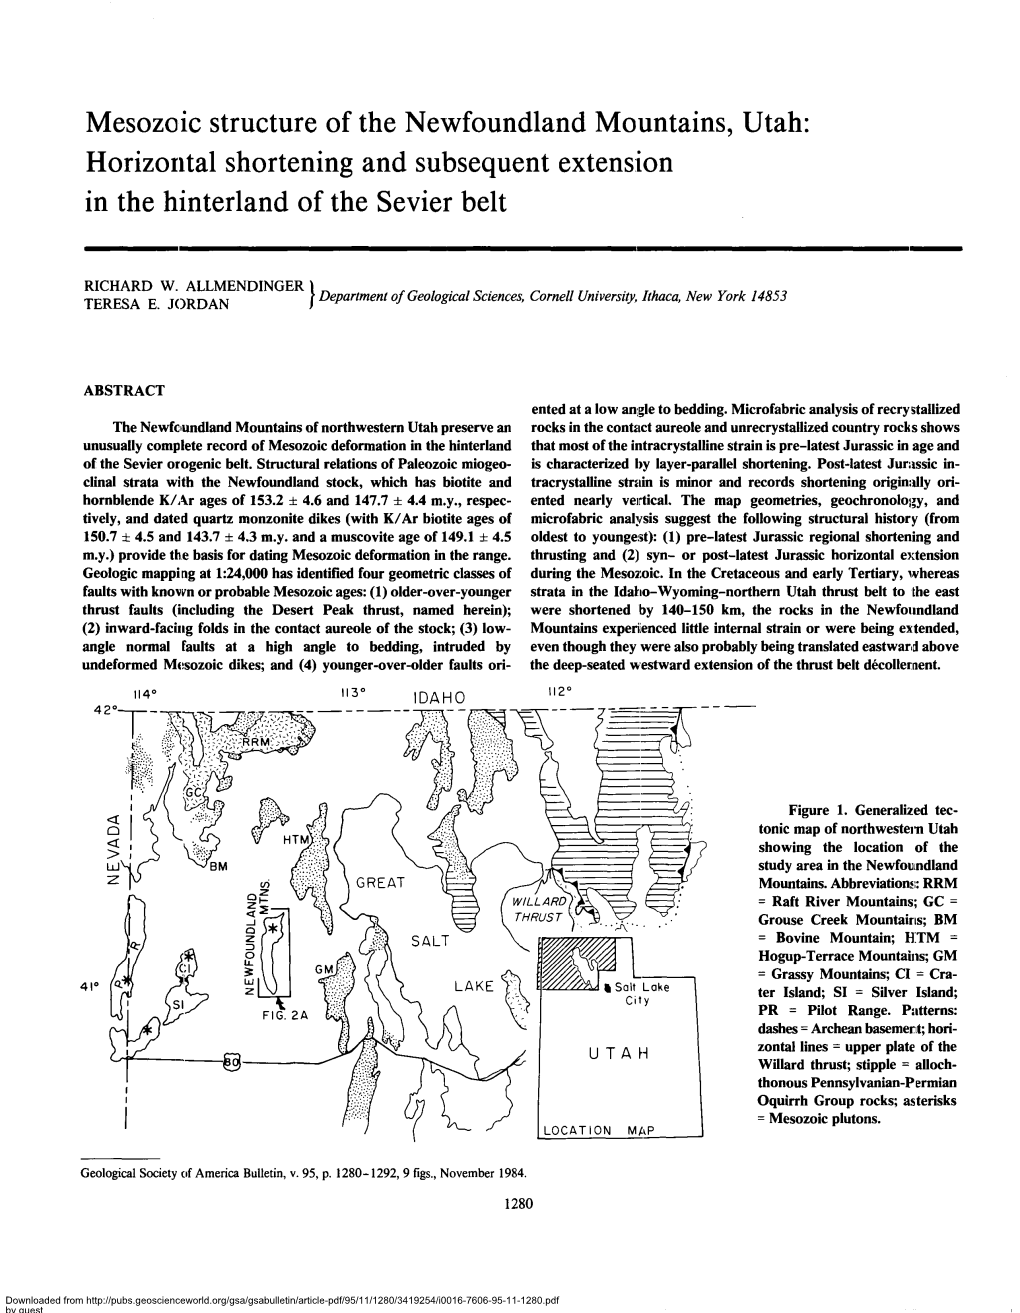 Mesozoic Structure of the Newfoundland Mountains, Utah: Horizontal Shortening and Subsequent Extension in the Hinterland of the Sevier Belt